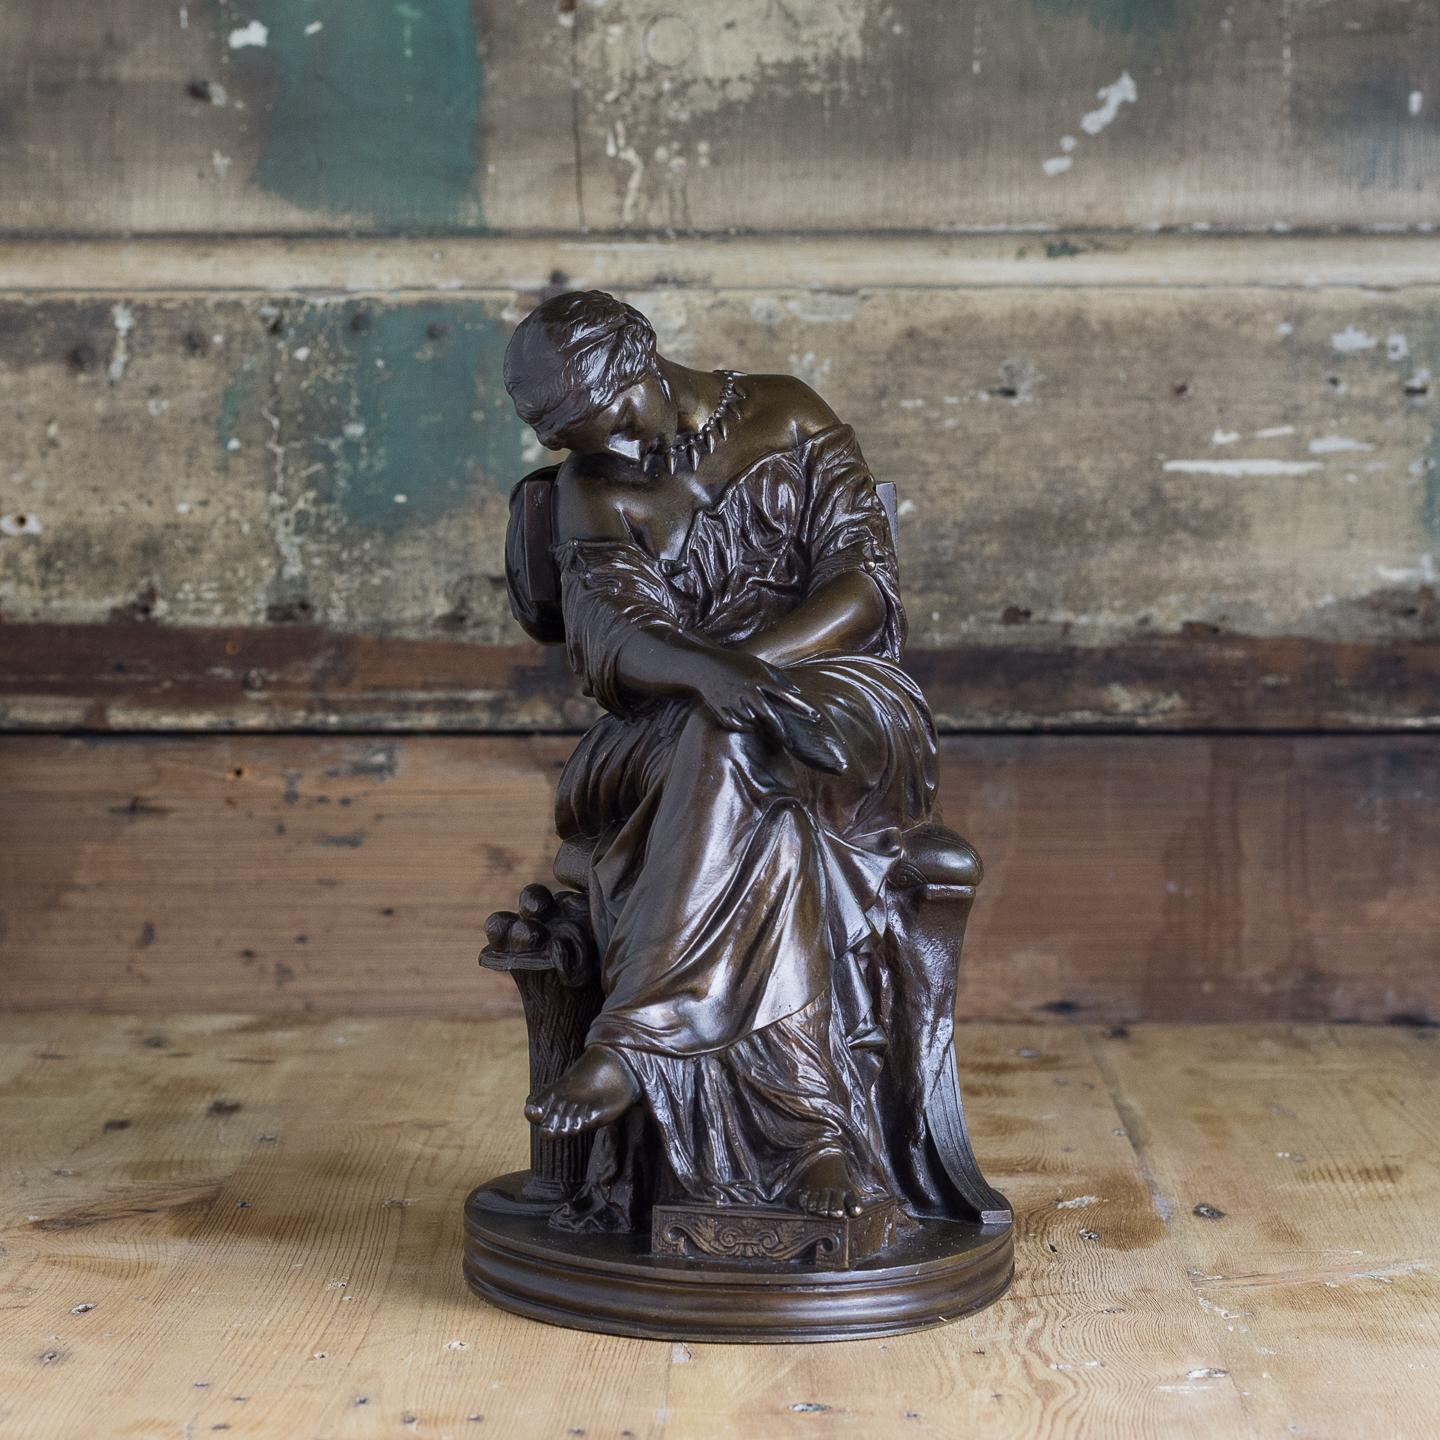 French, 19th century bronze sculpture of Penelope waiting for Odysseus, probably cast by the Barbedienne foundry to a design by Pierre-Jules Cavalier, stamped to the rear 'J.Cavelier no. 167' and 'Reduction Meccanique'.

This bronze depicts a